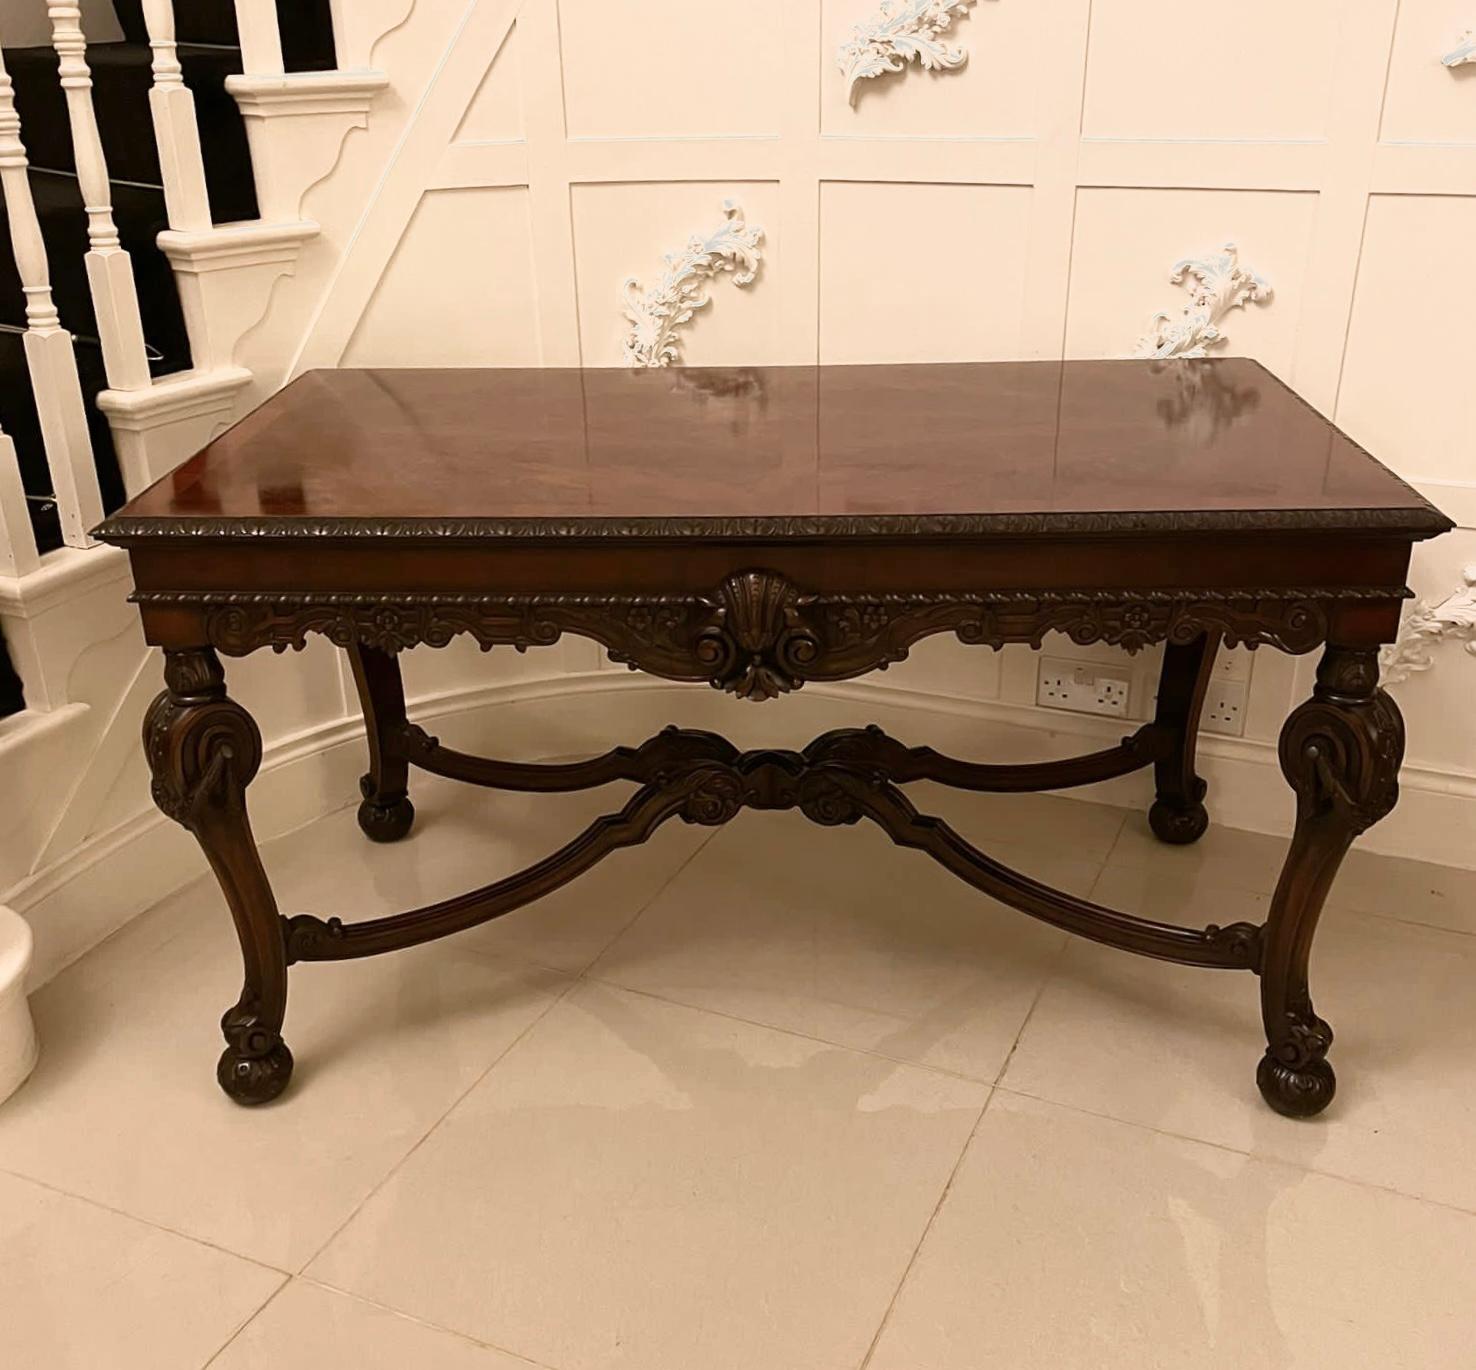 Outstanding Quality Antique Edwardian Freestanding Carved Mahogany Centre Table For Sale 2